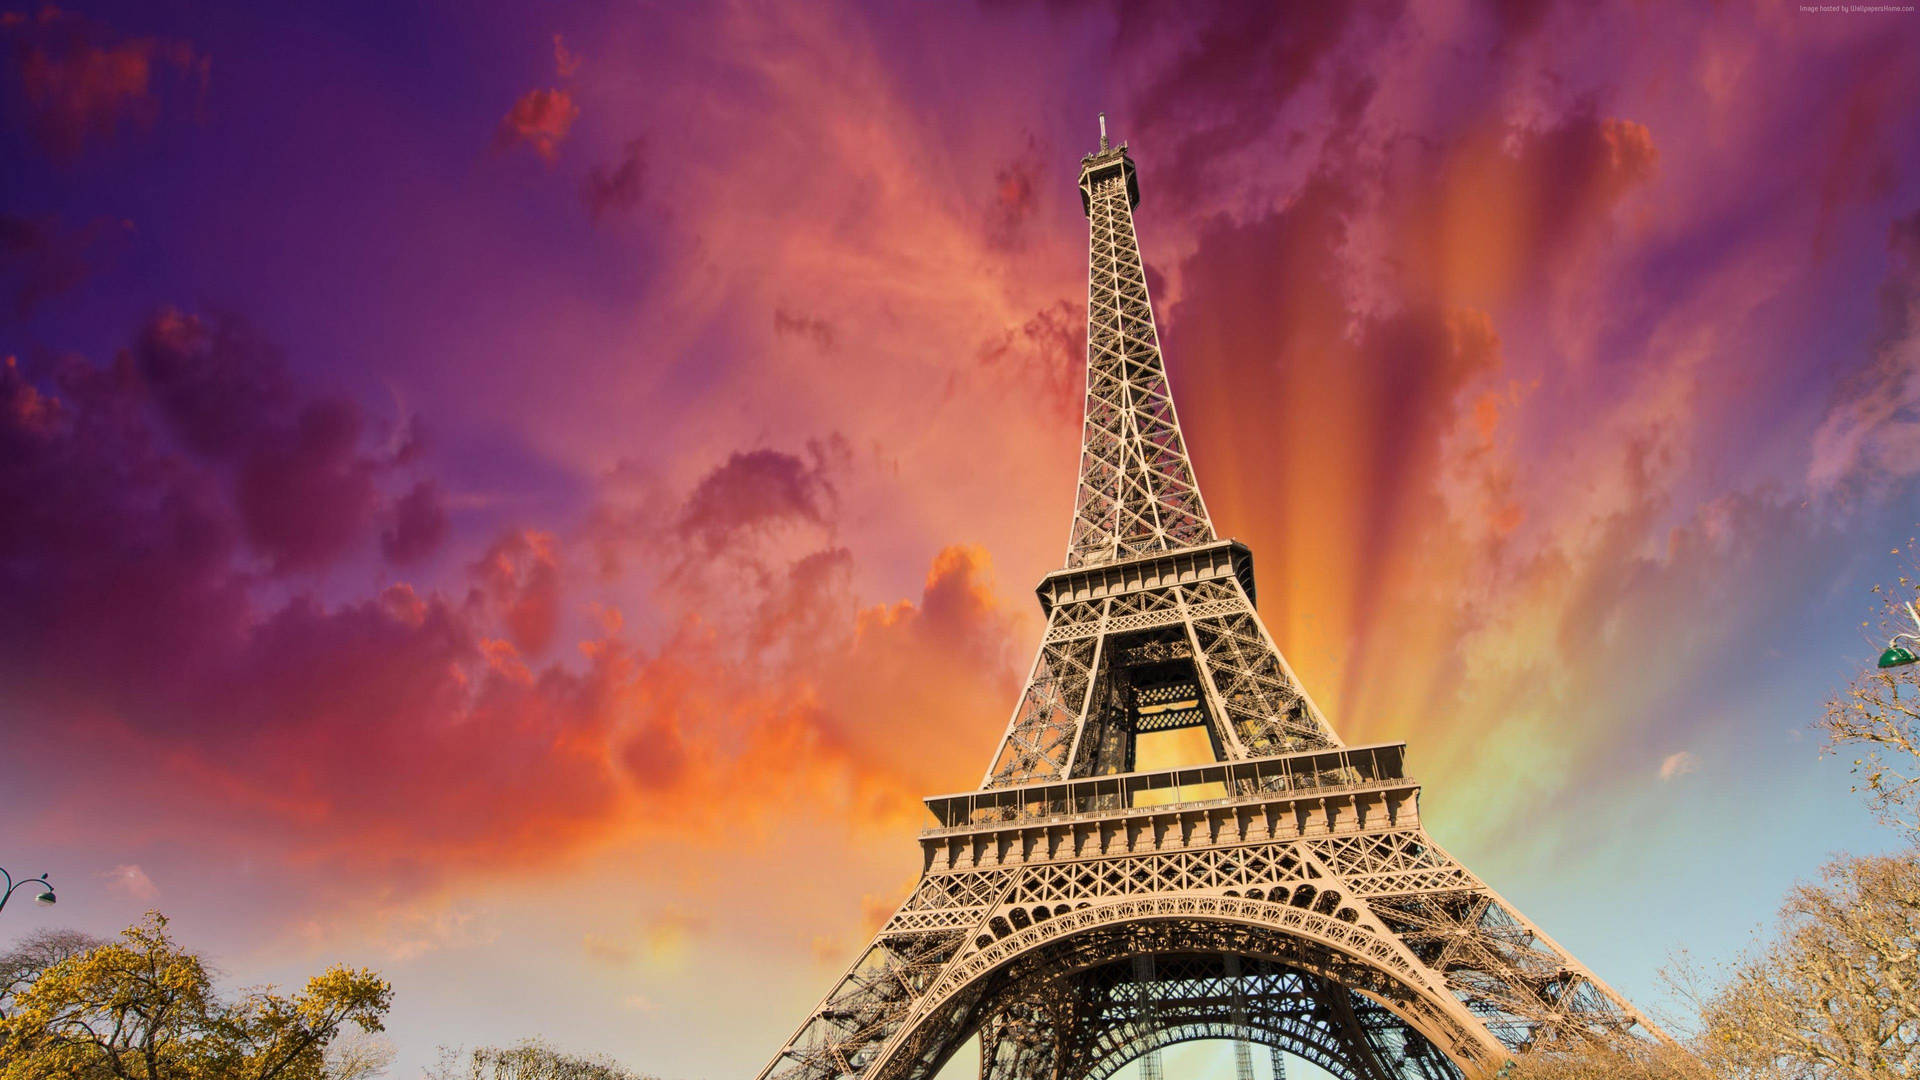 Eiffel Tower With Aesthetic Sun Rays Wallpaper